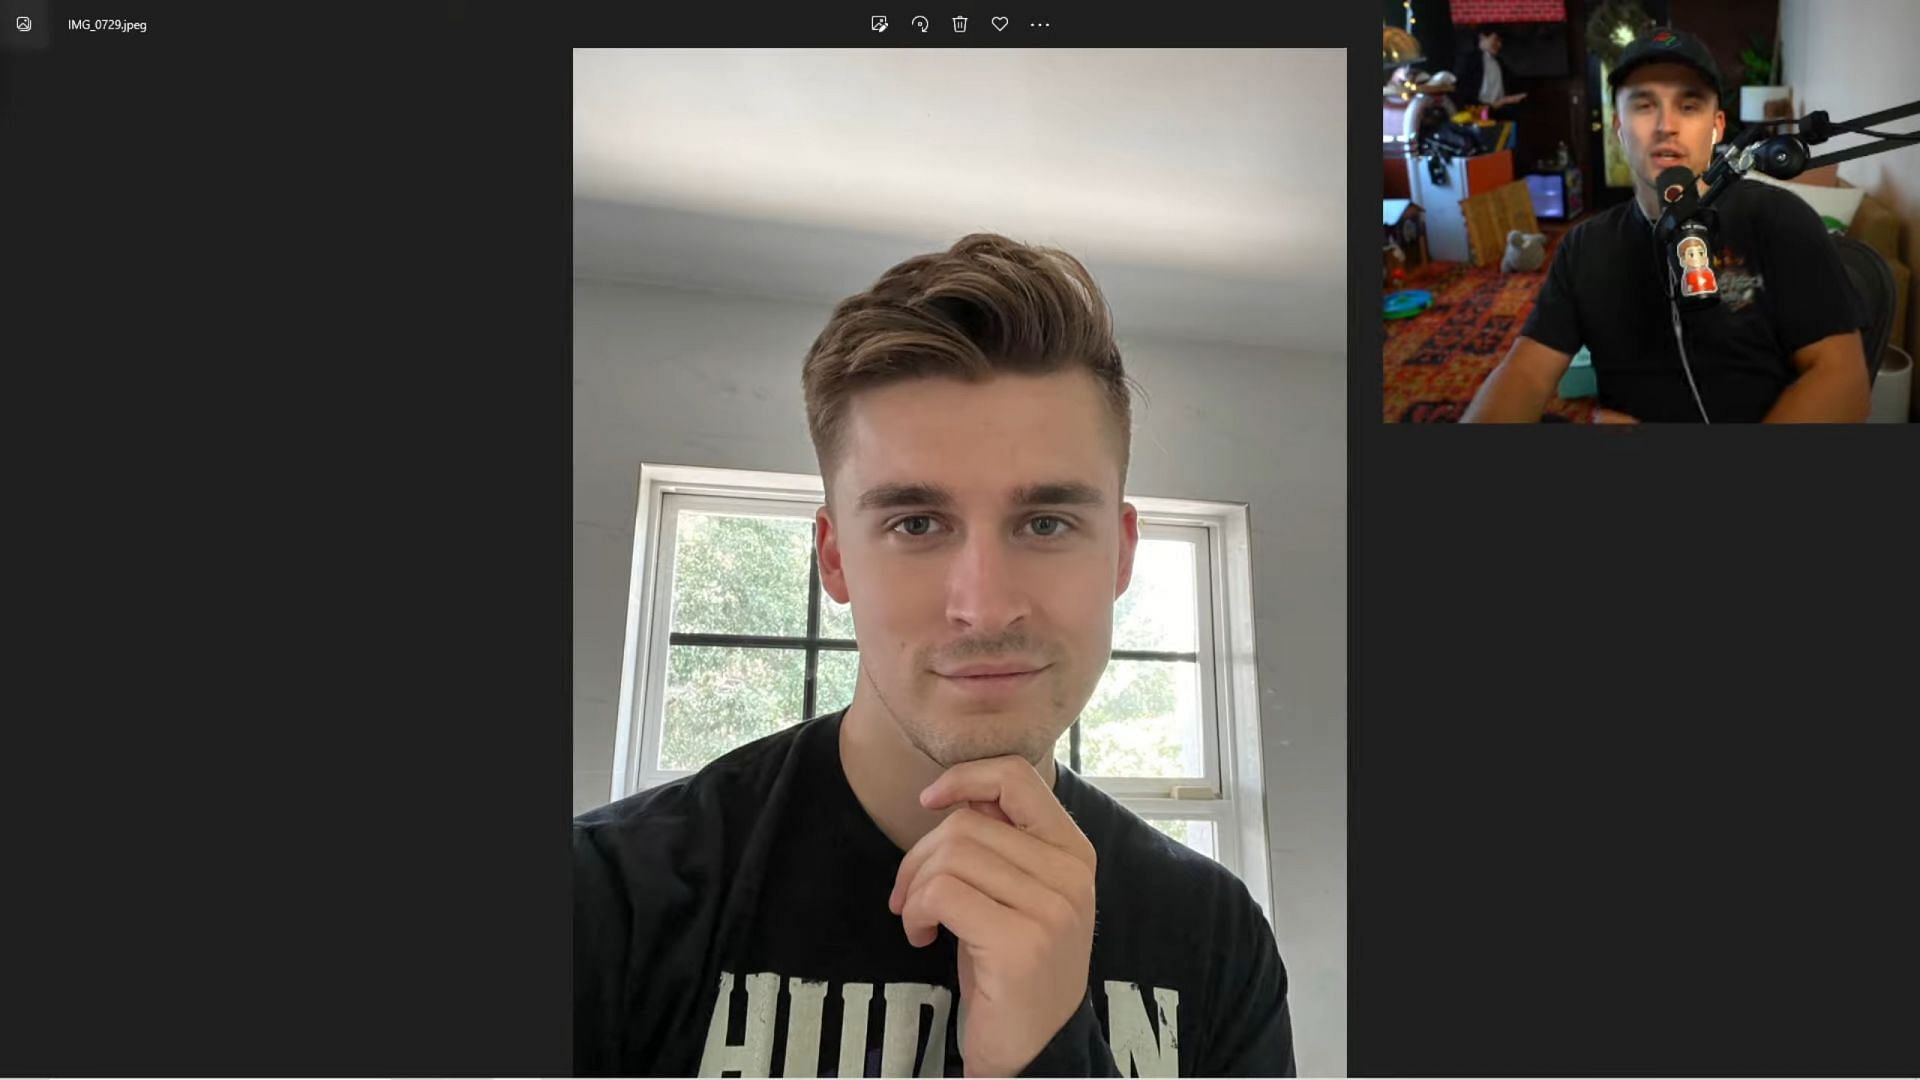 YouTube Gaming streamer shows the real, unedited image (Image via Mogul Mail/YouTube)